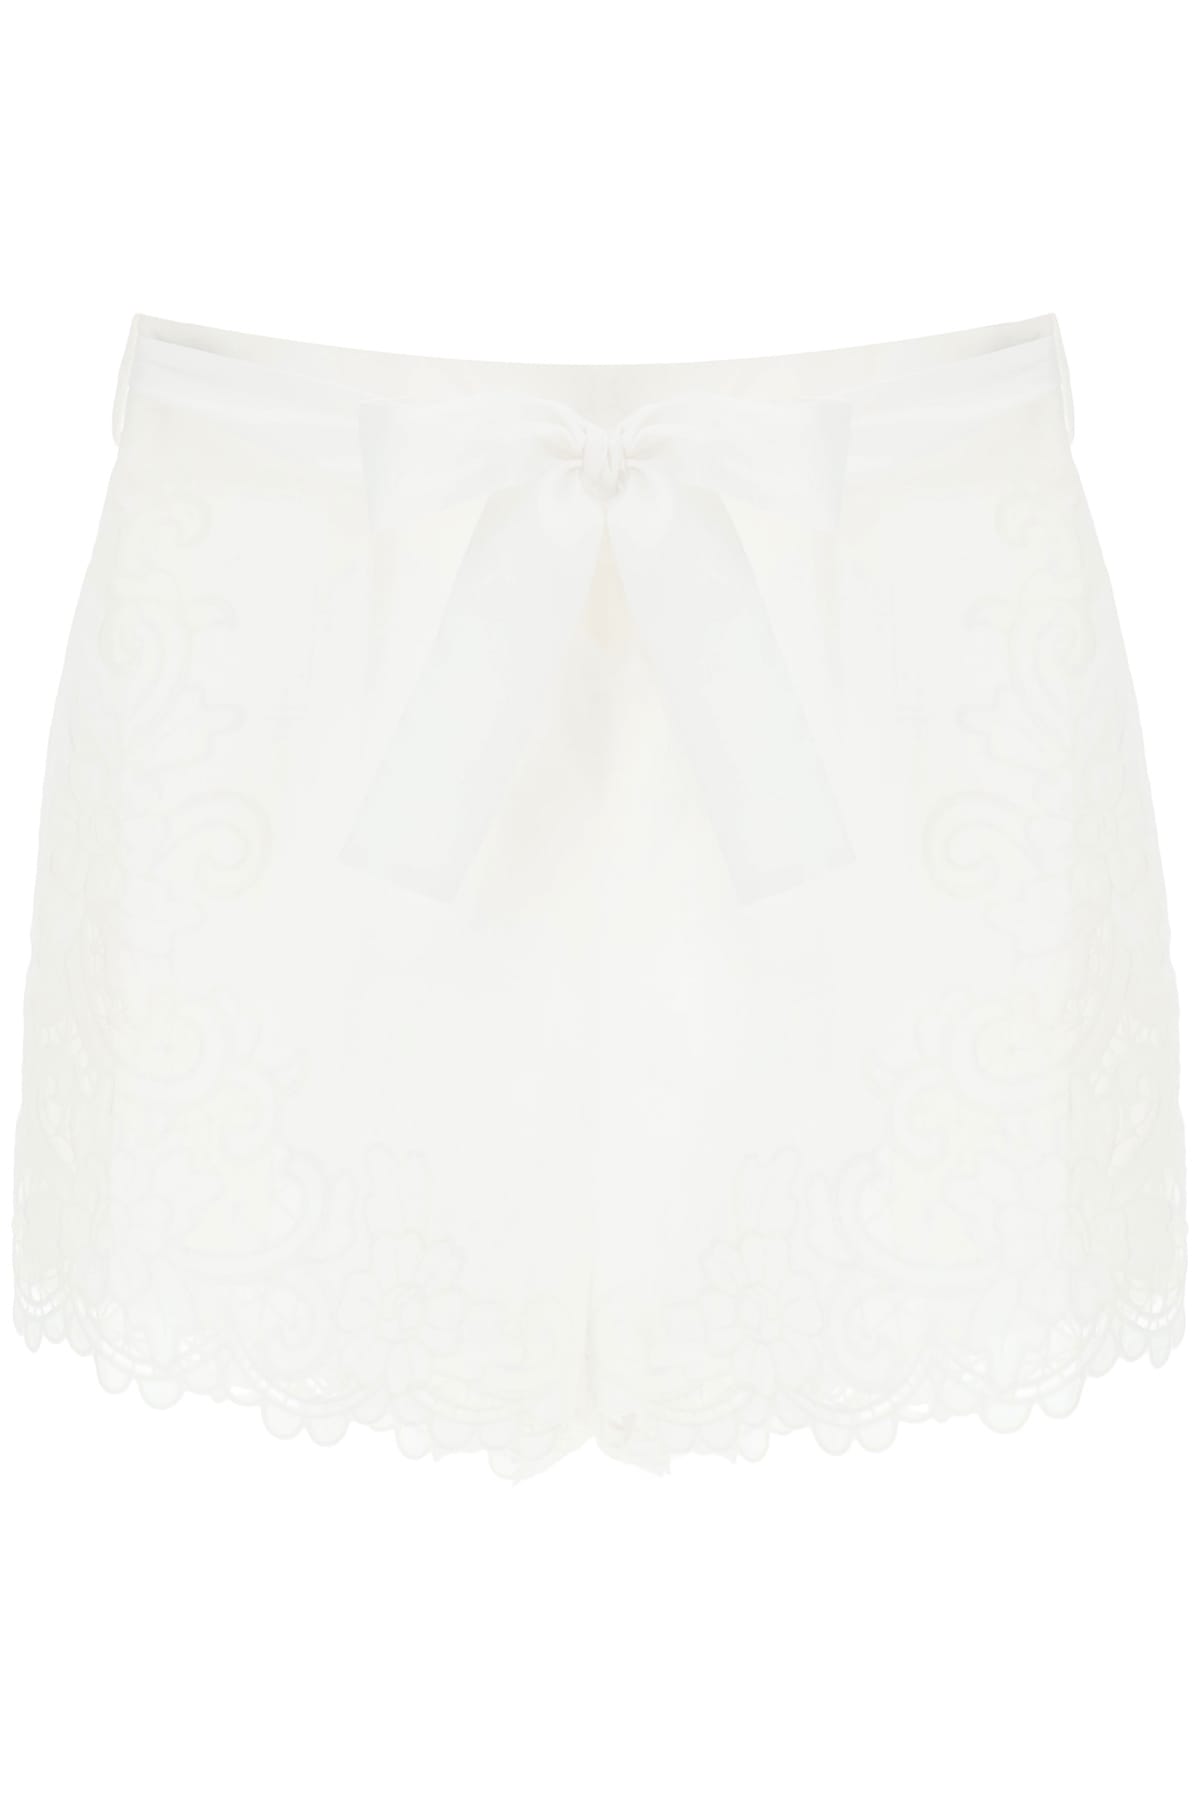 Zimmermann Lulu Scallop Shorts With Embroidery